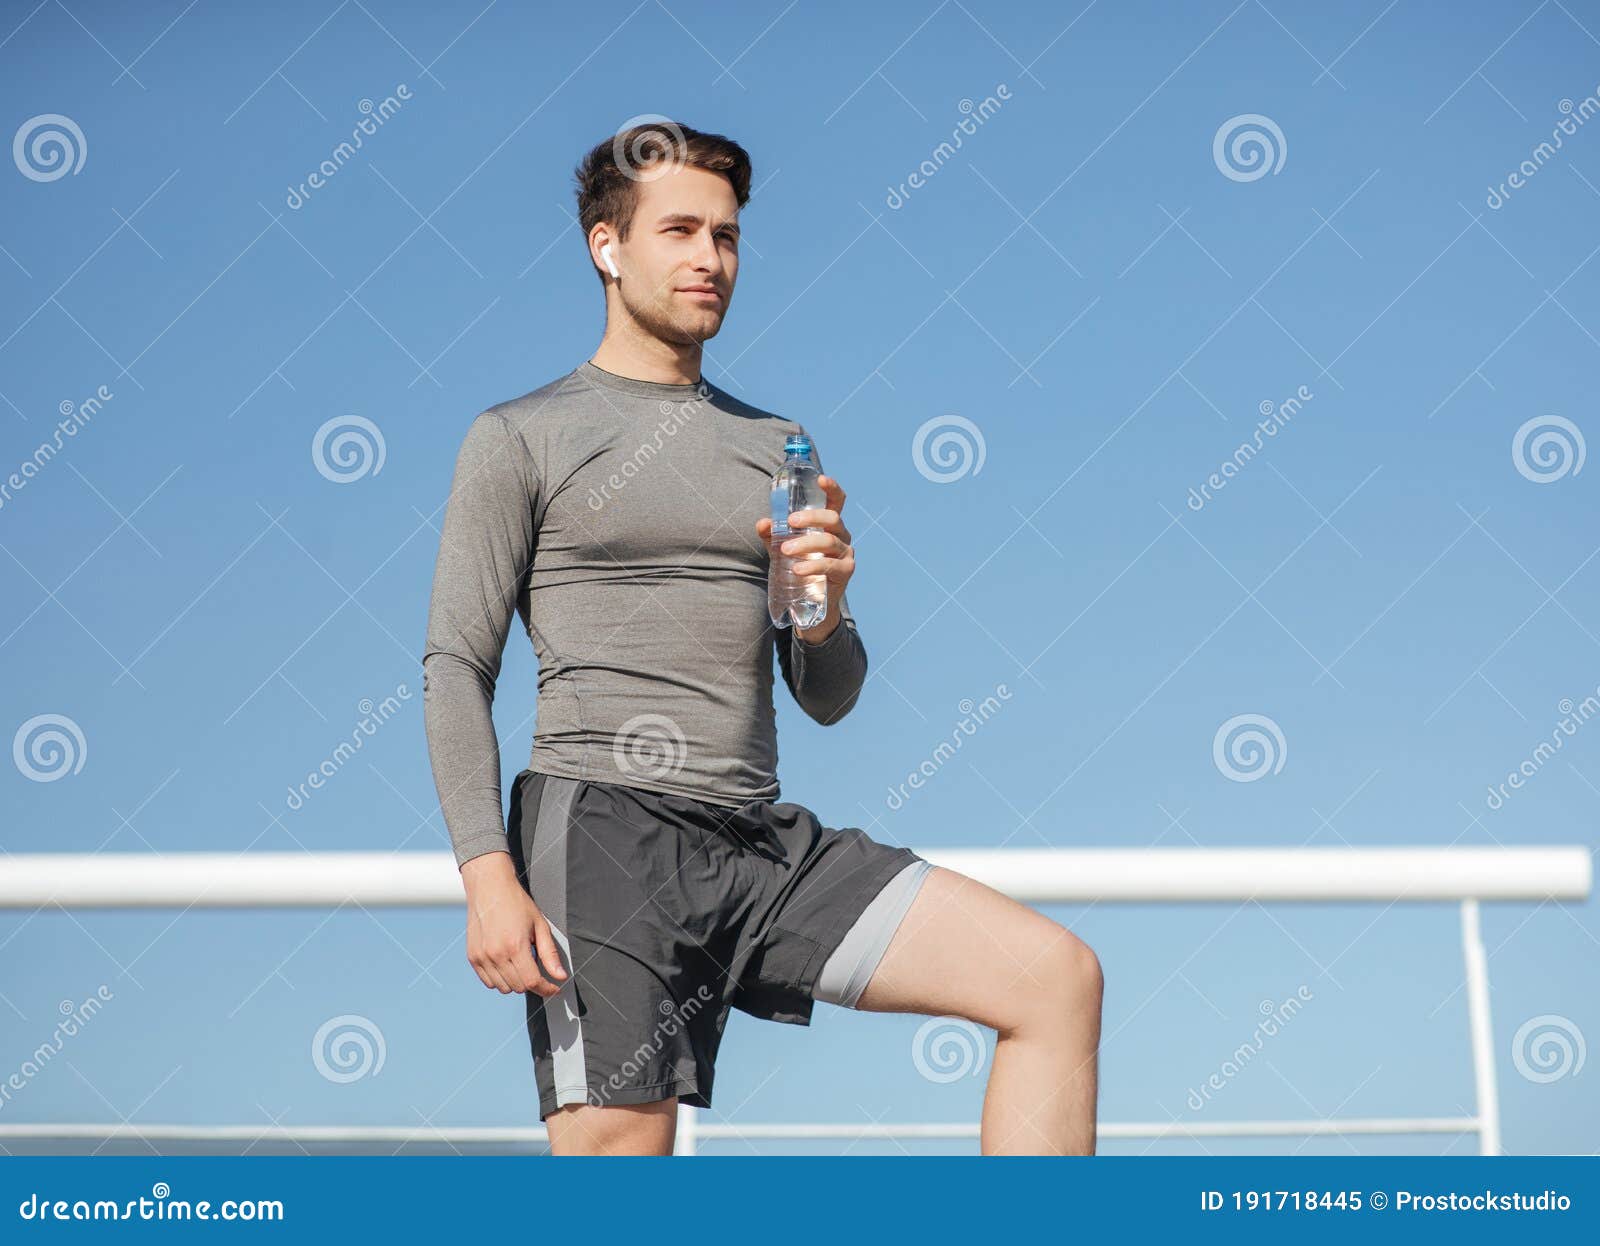 health and body care. muscular handsome guy in sportswear, with wireless headphones holding bottle of water on blue sky